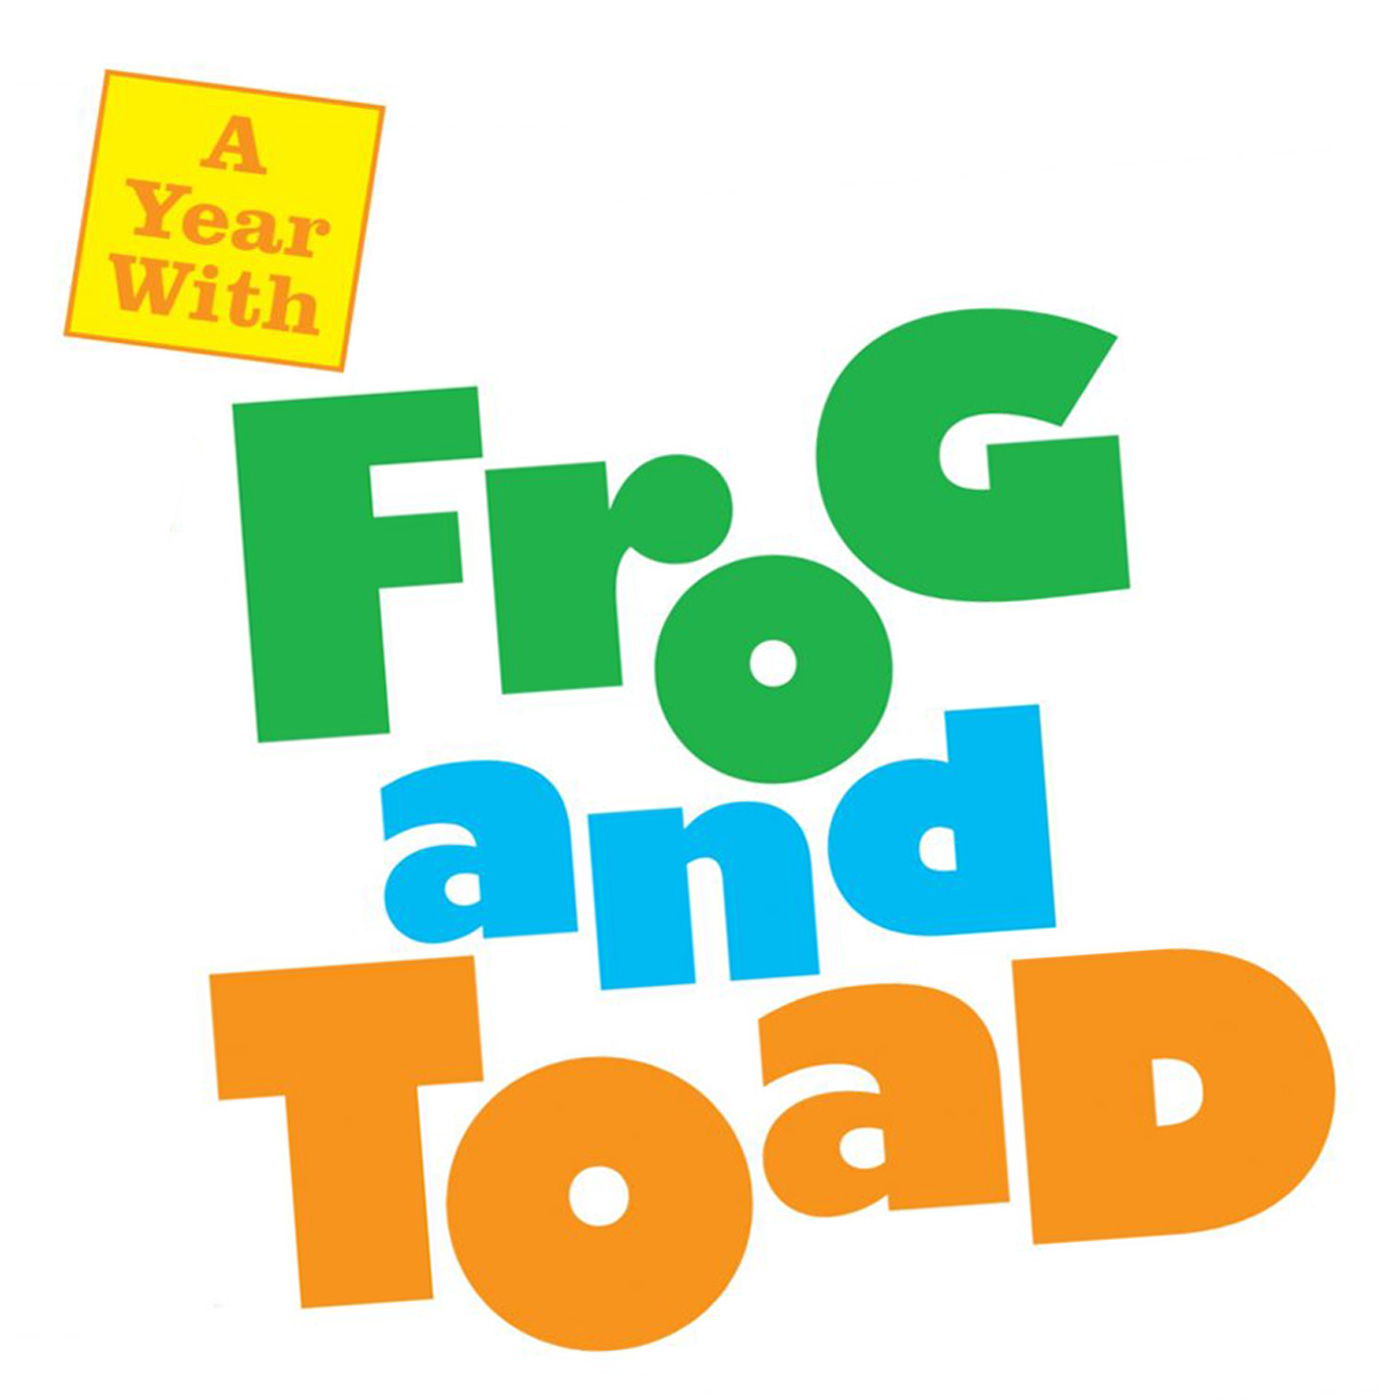 A Year with Frog and Toad, 2021